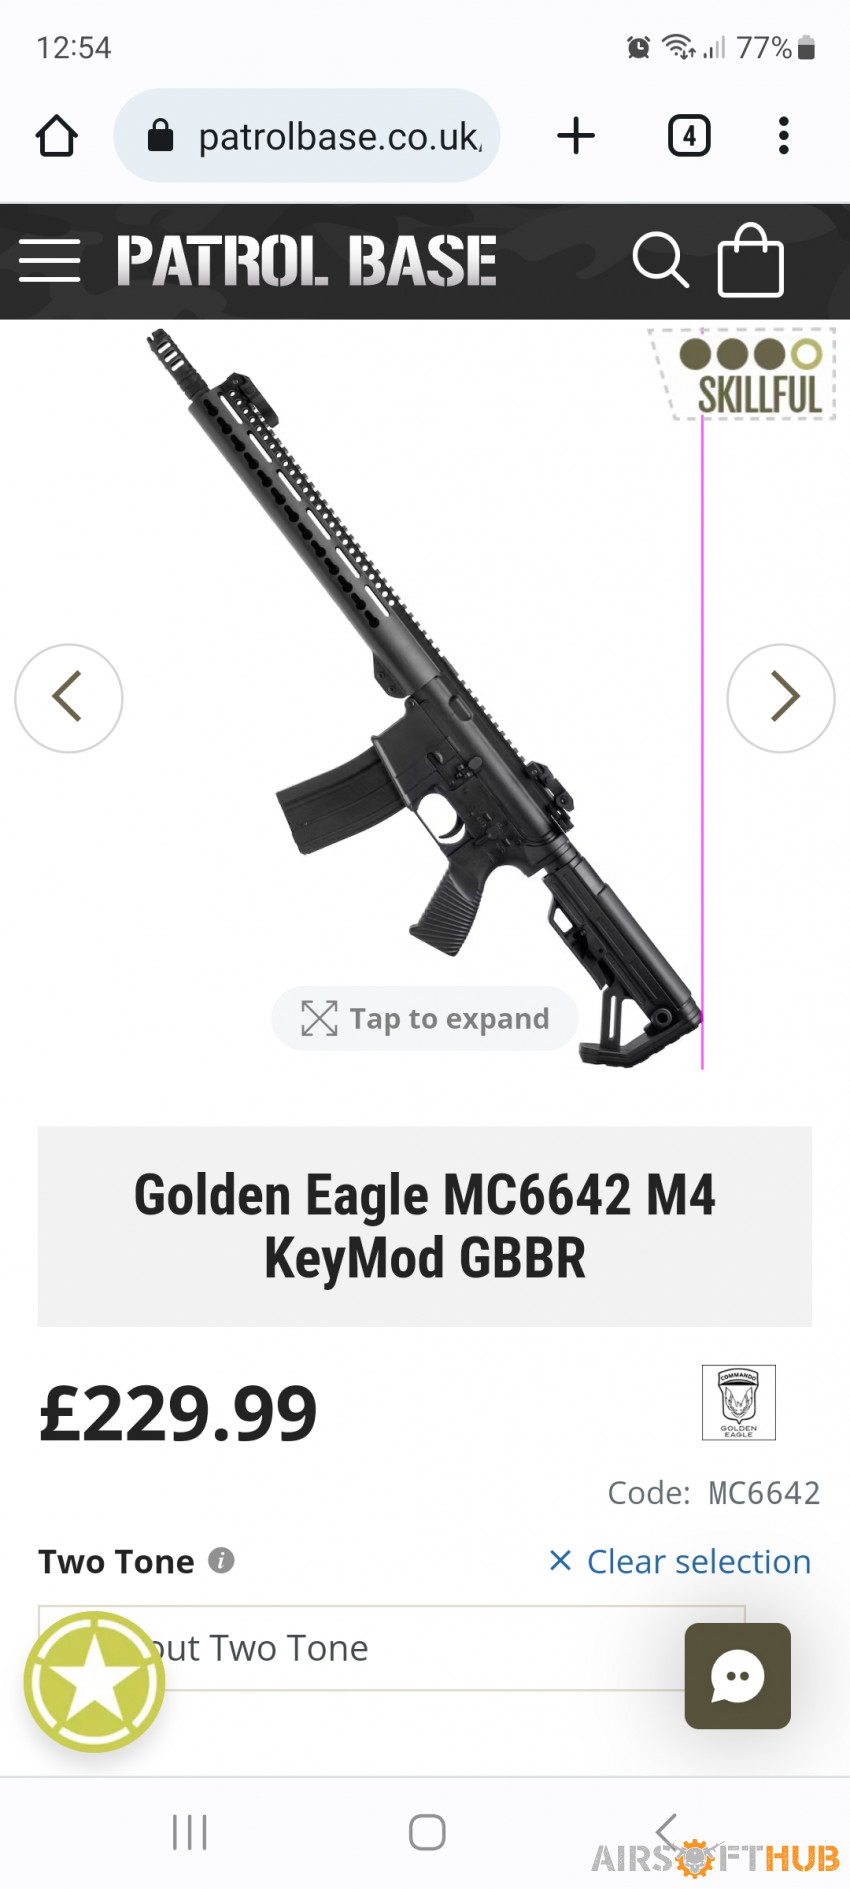 Wanting GBBR york area m4 - Used airsoft equipment